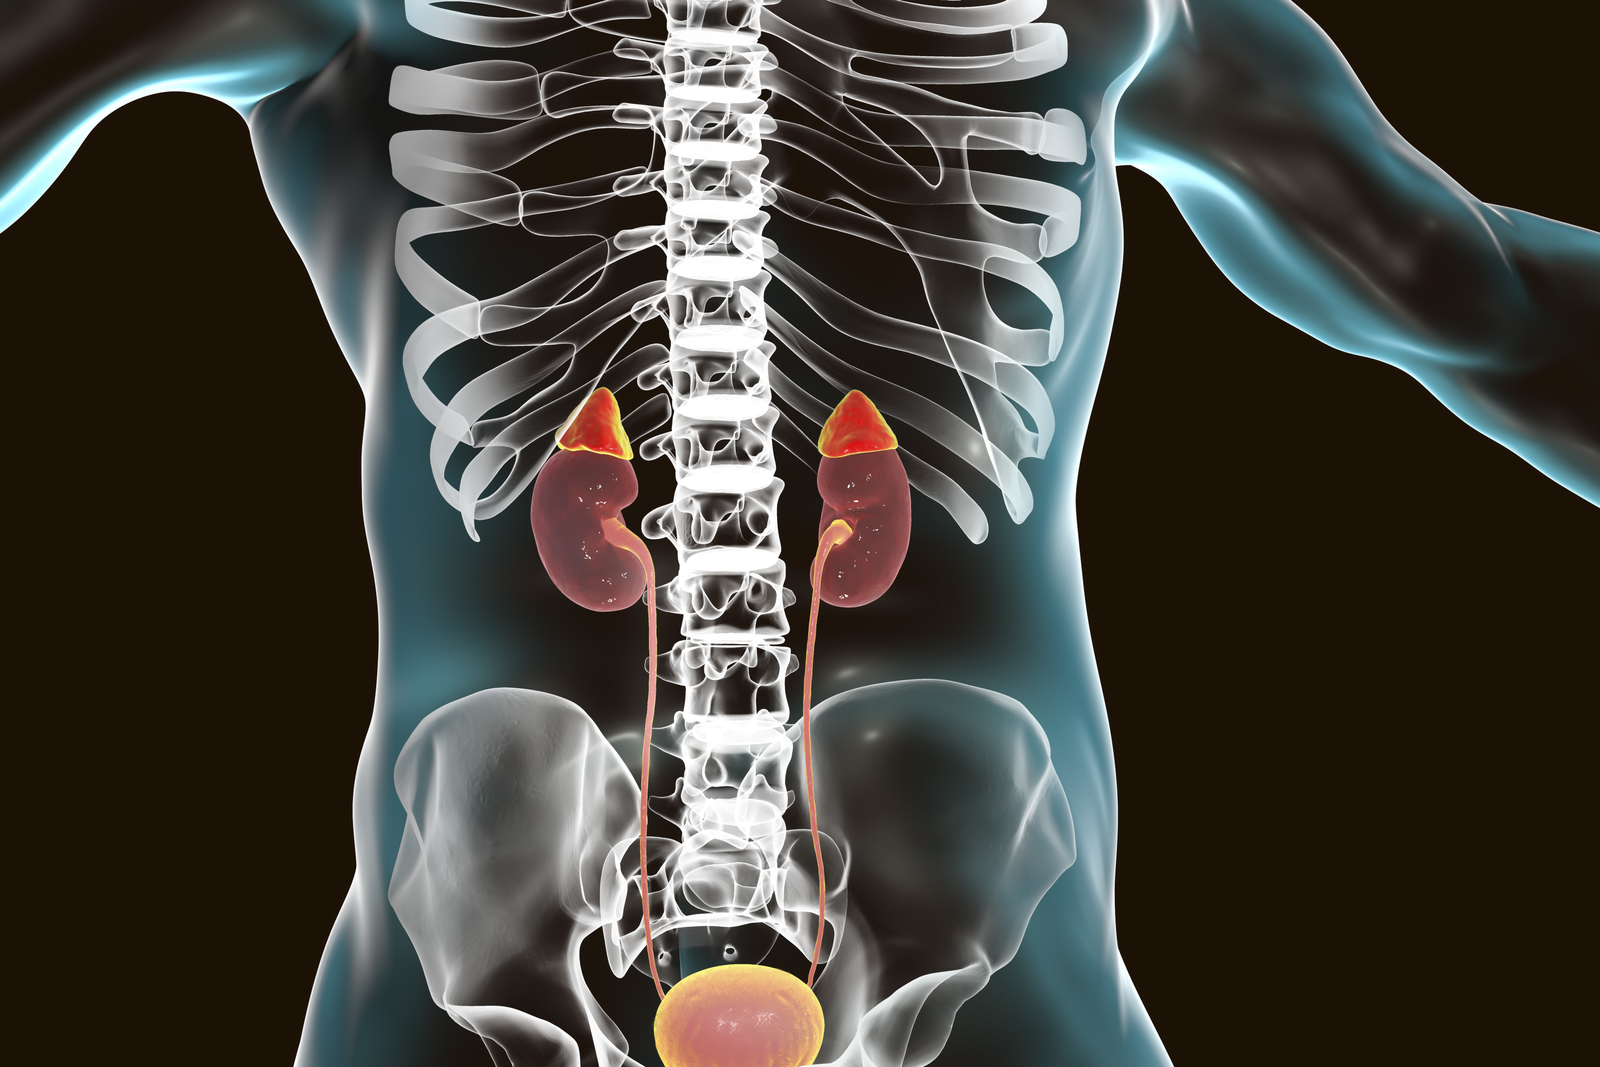 adrenal gland location in the body